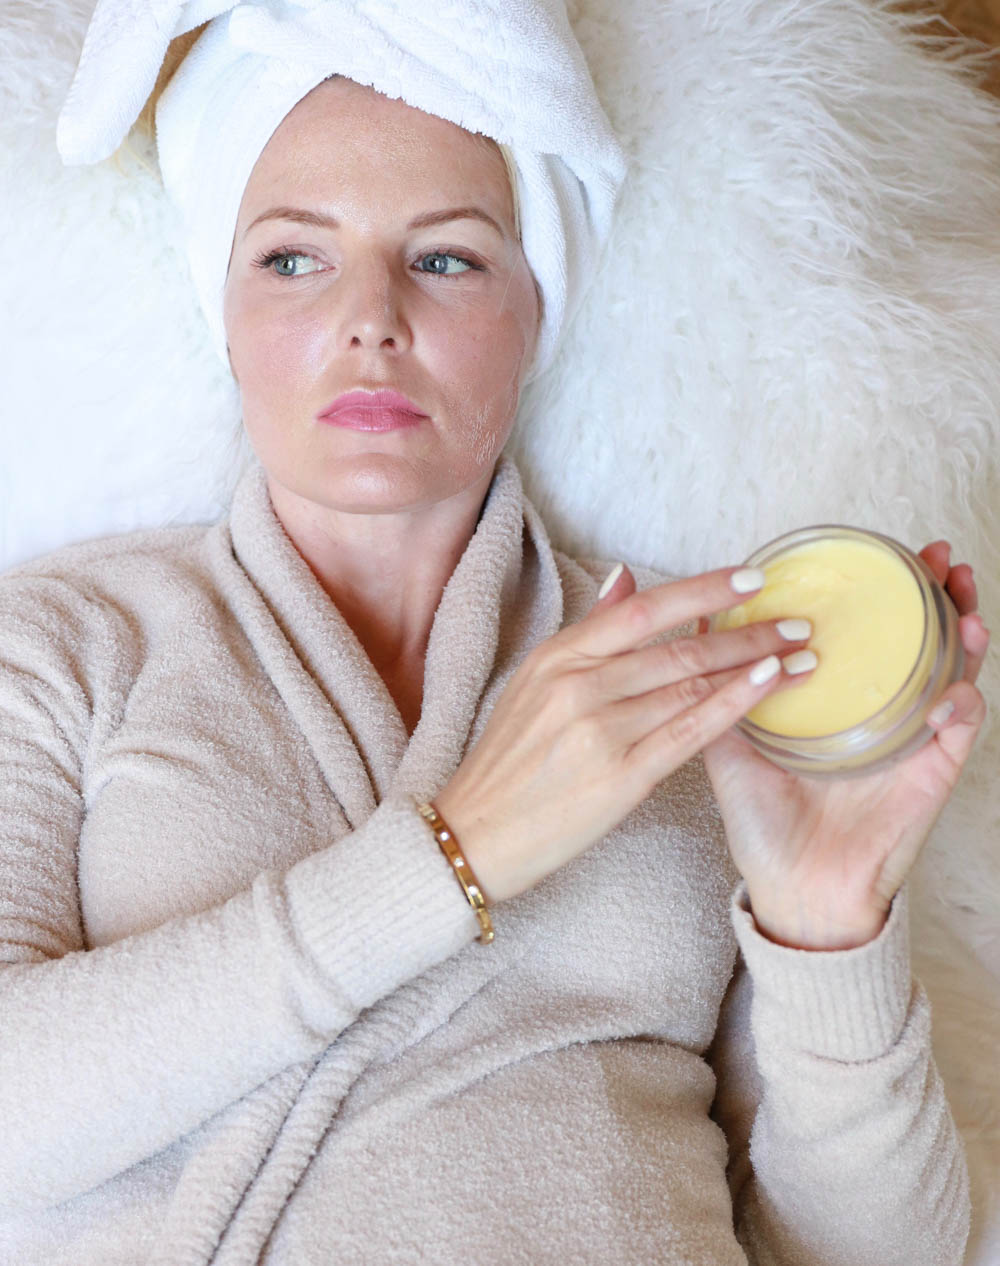 Colleen Rothschild skincare, nighttime skin routine over 40, erin busbee busbeestyle.com, fashion blogger, beauty blogger, beauty youtuber, 